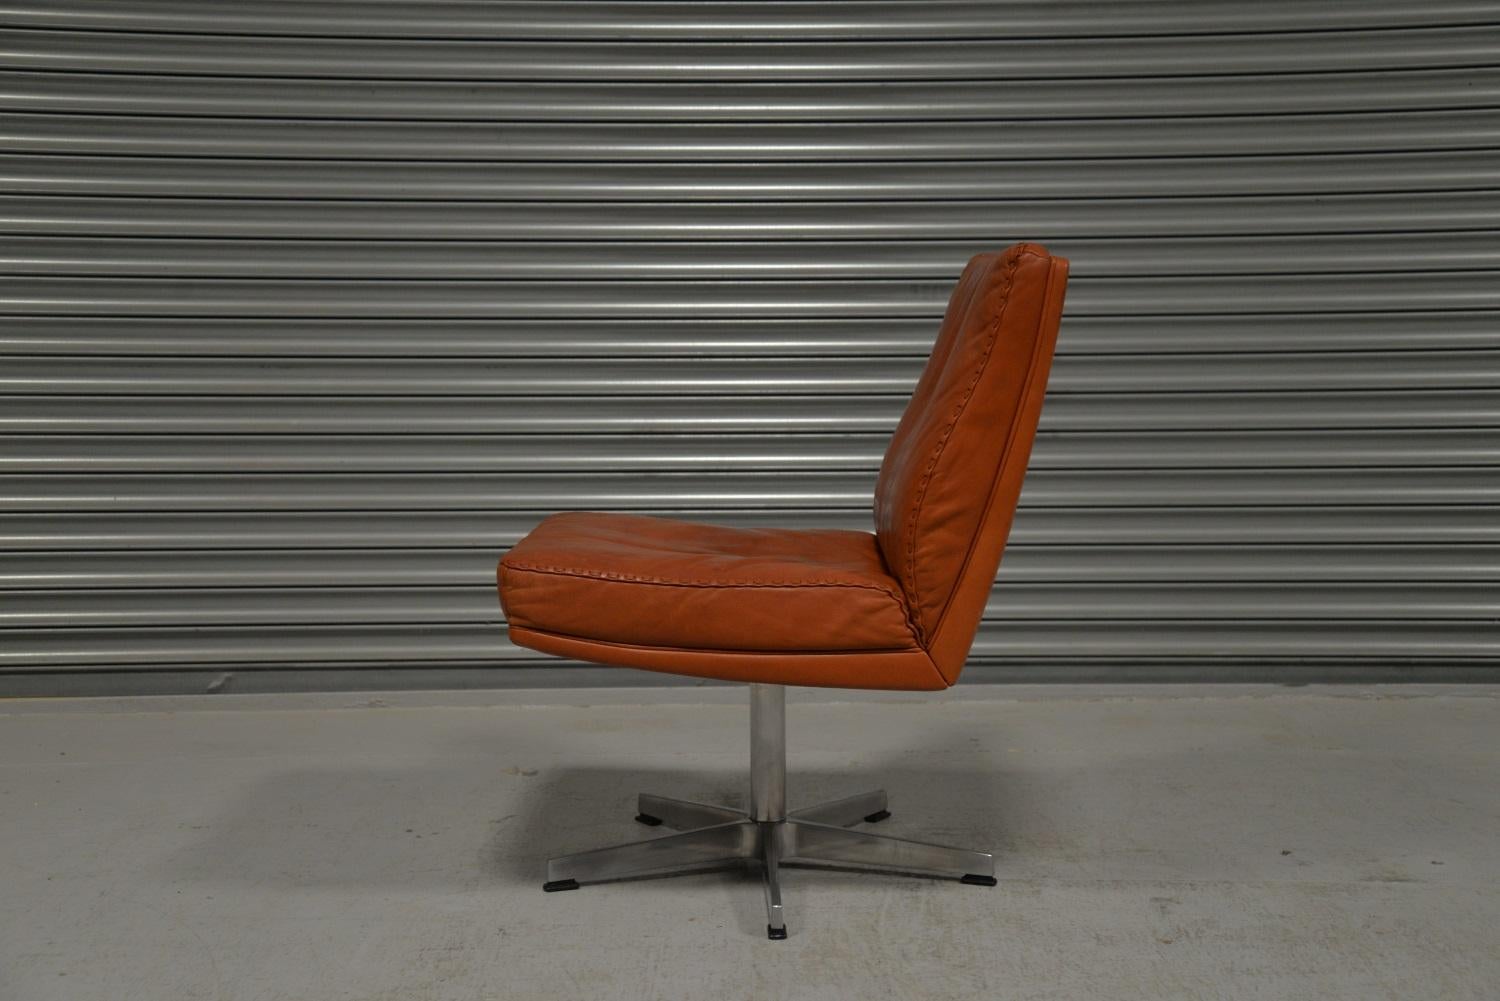 Discounted airfreight for our US and International customers (from 2 weeks door to door).

We are delighted to bring to you a rare vintage De Sede ds 35 swivel office chairs. Hand built in the 1960s by de Sede craftsman in Switzerland and